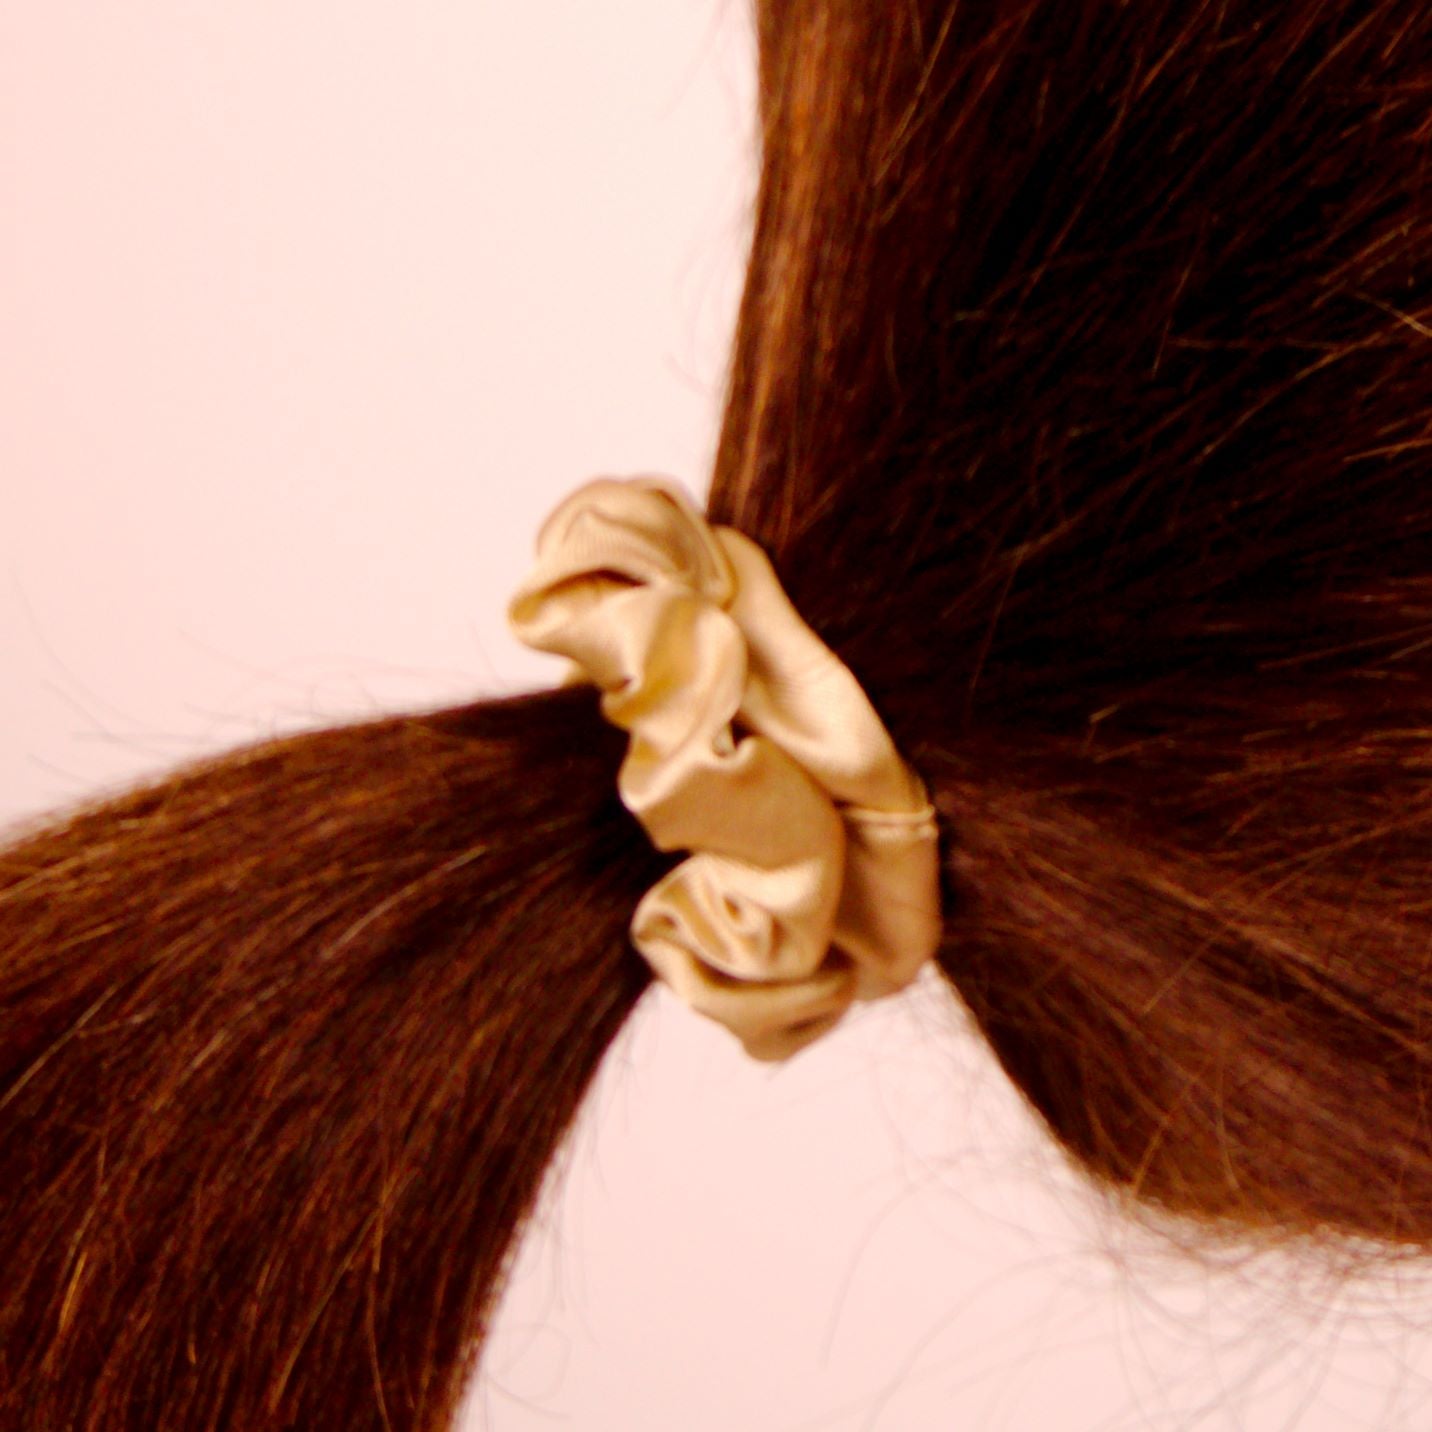 Amelia Beauty, Tan Satin Scrunchies, 2.25in Diameter, Gentle on Hair, Strong Hold, No Snag, No Dents or Creases. 12 Pack